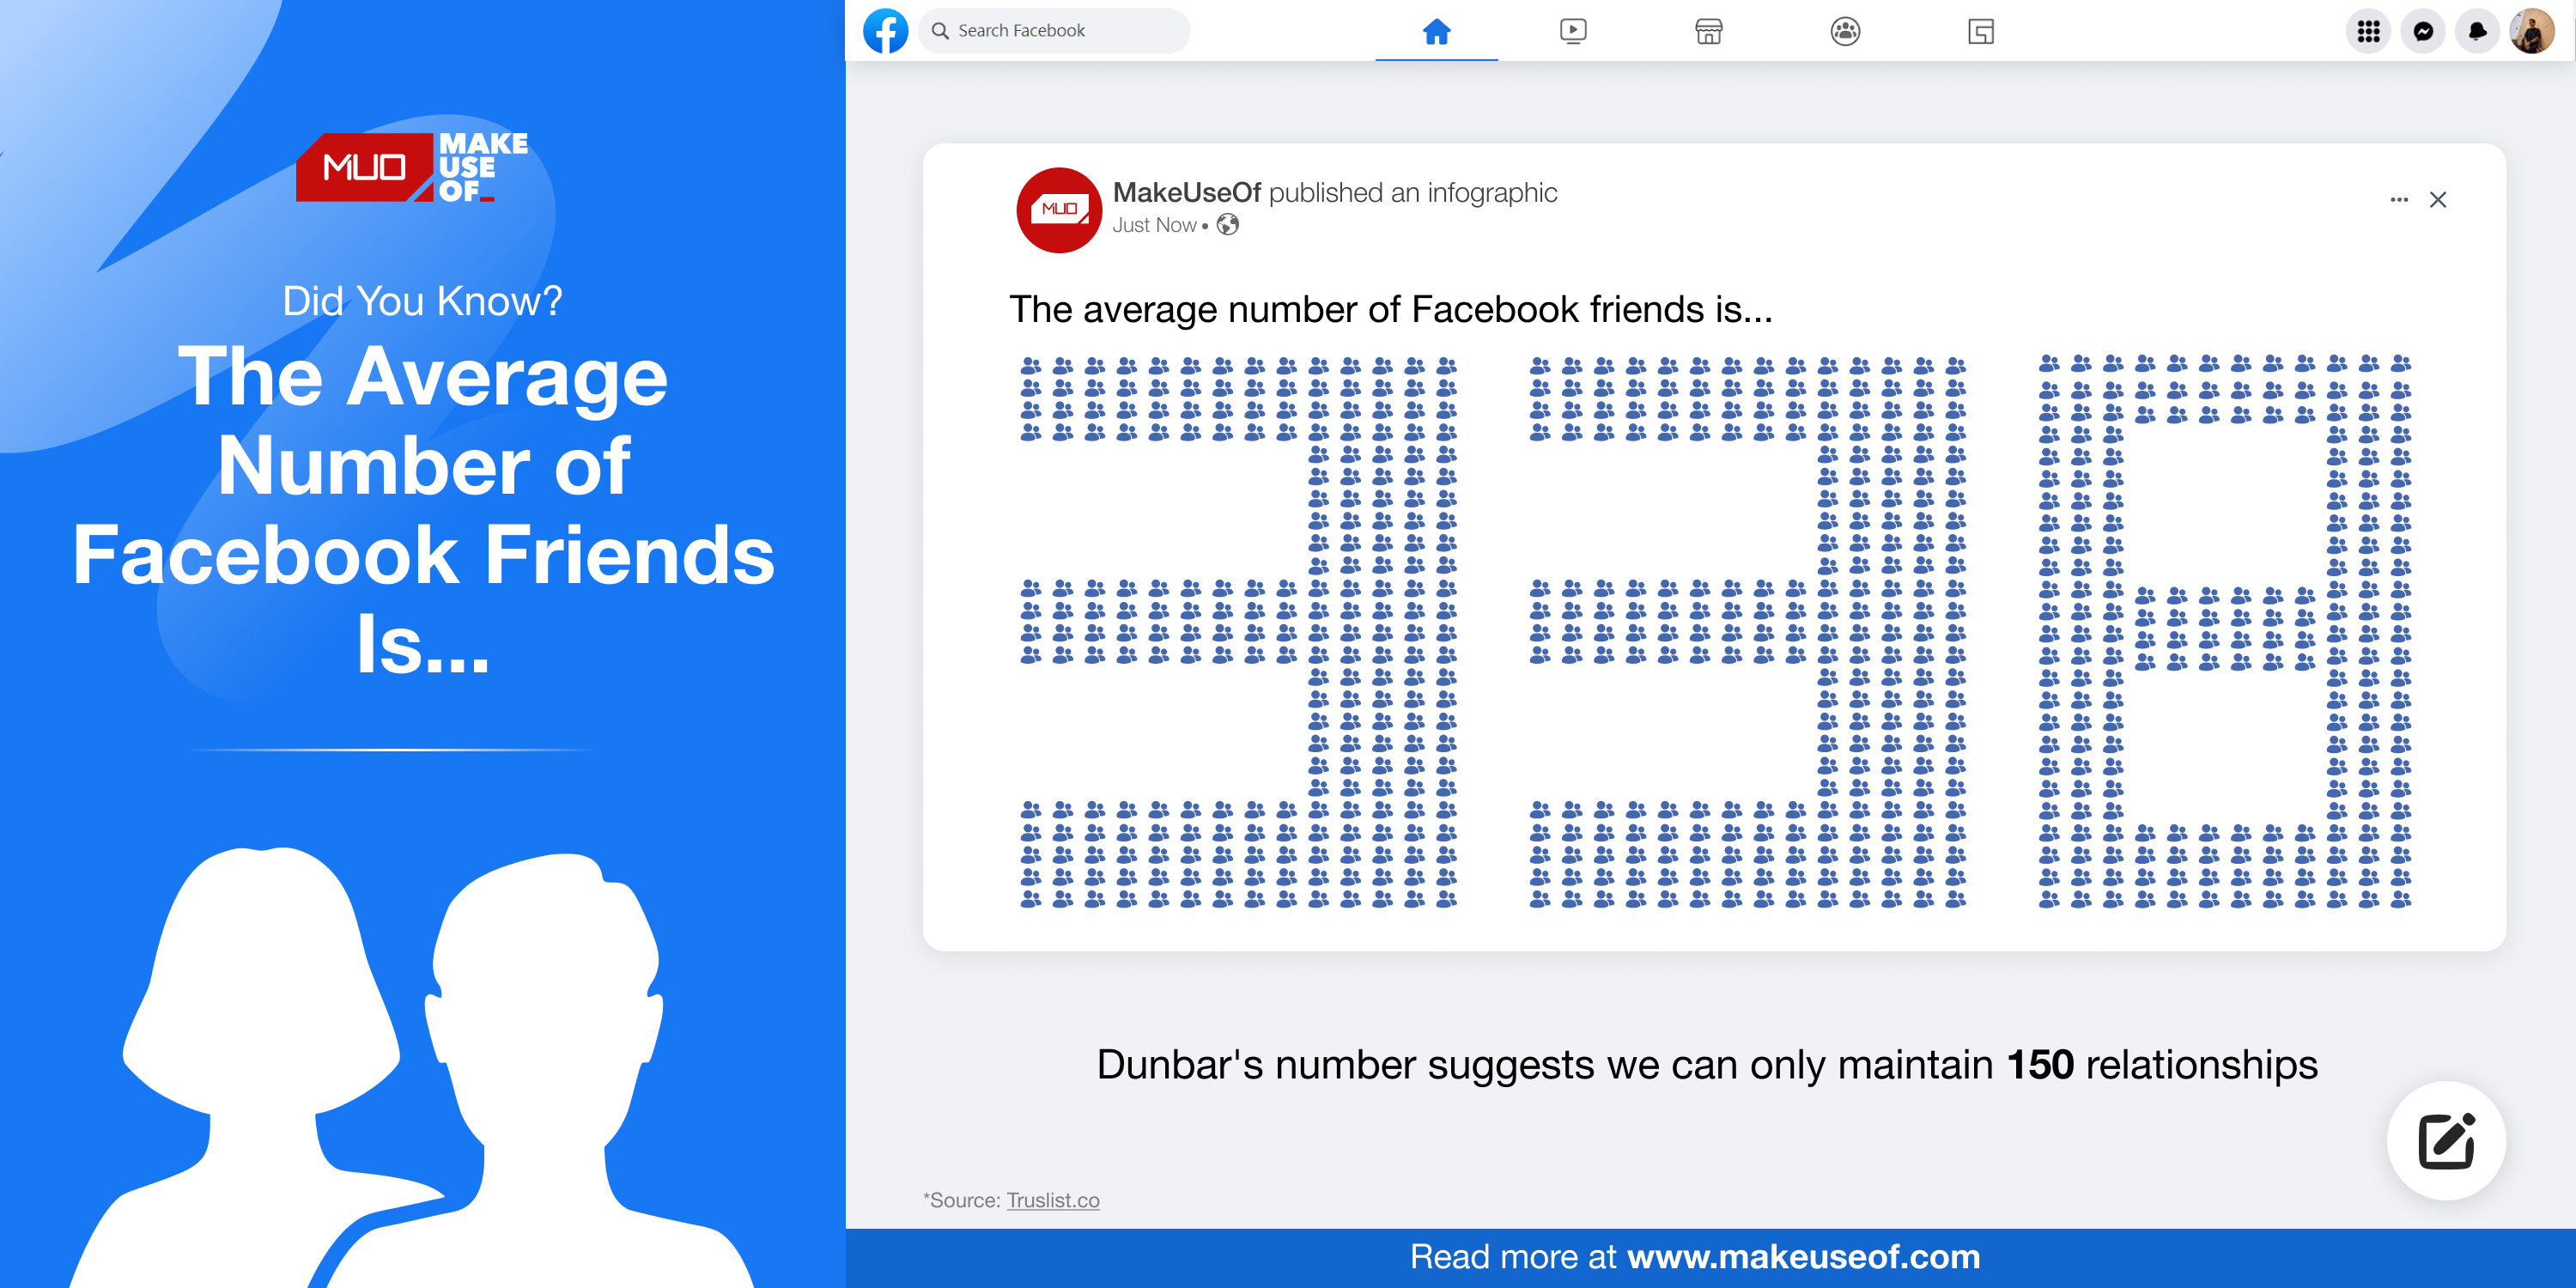 Infographic on Average Number of Facebook Friends